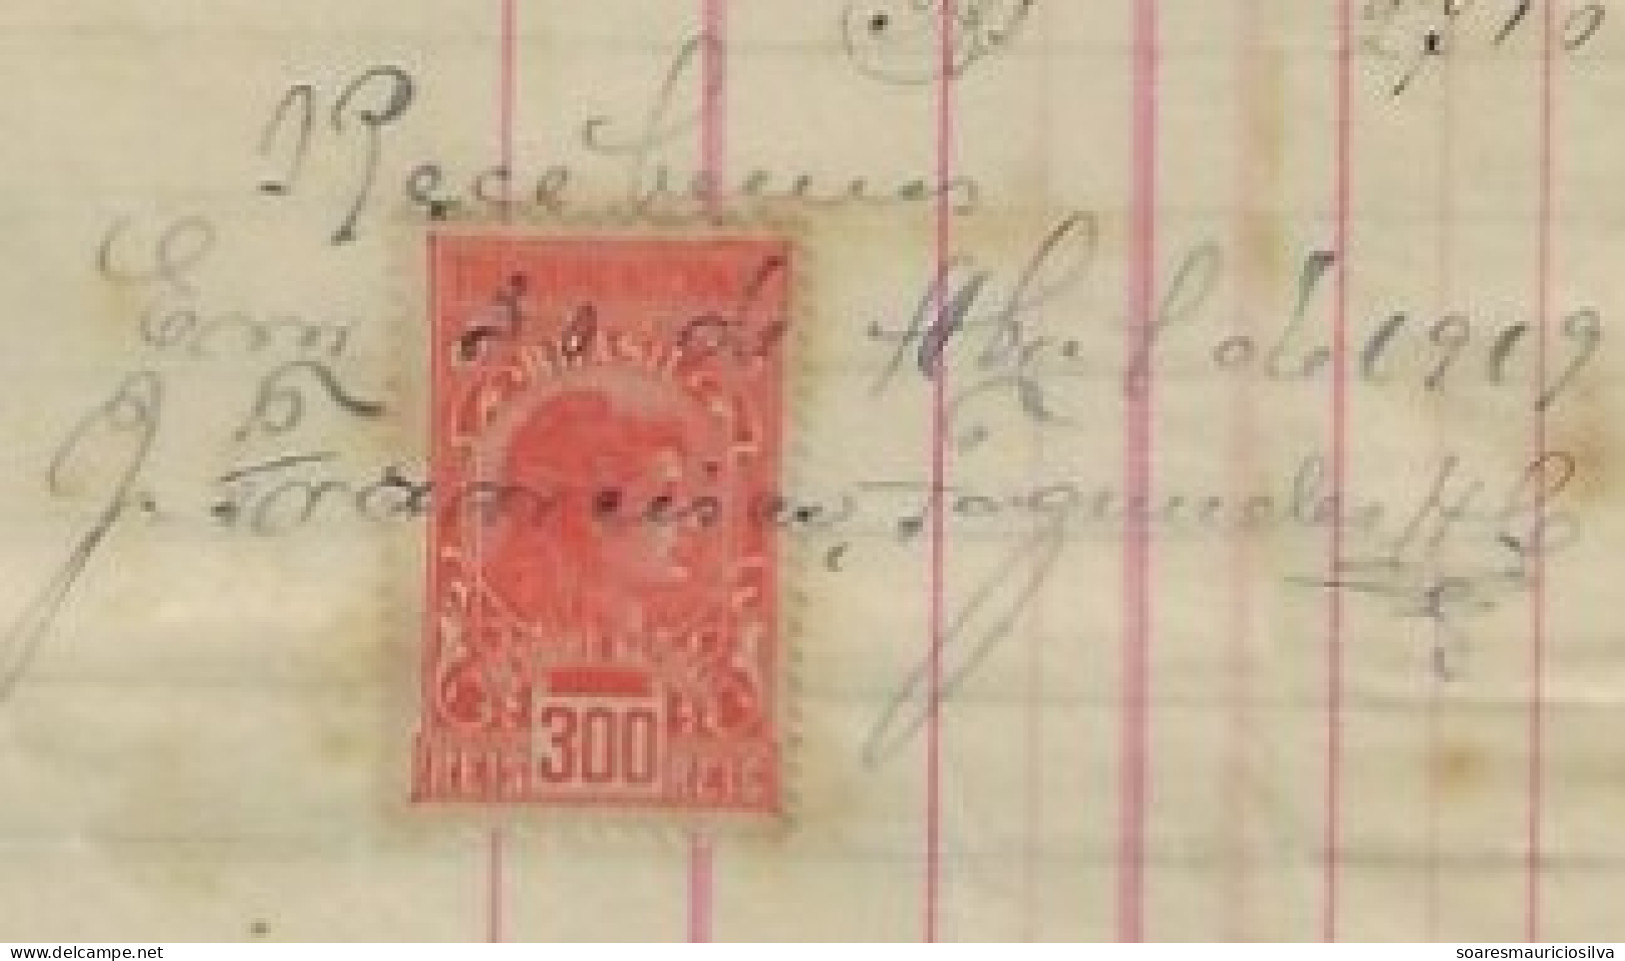 Brazil 1919 Cascatinha Warehouse By J. Francisco, Fagundes & Co Invoice Issued In Petrópolis National Tax Stamp 300 Réis - Briefe U. Dokumente